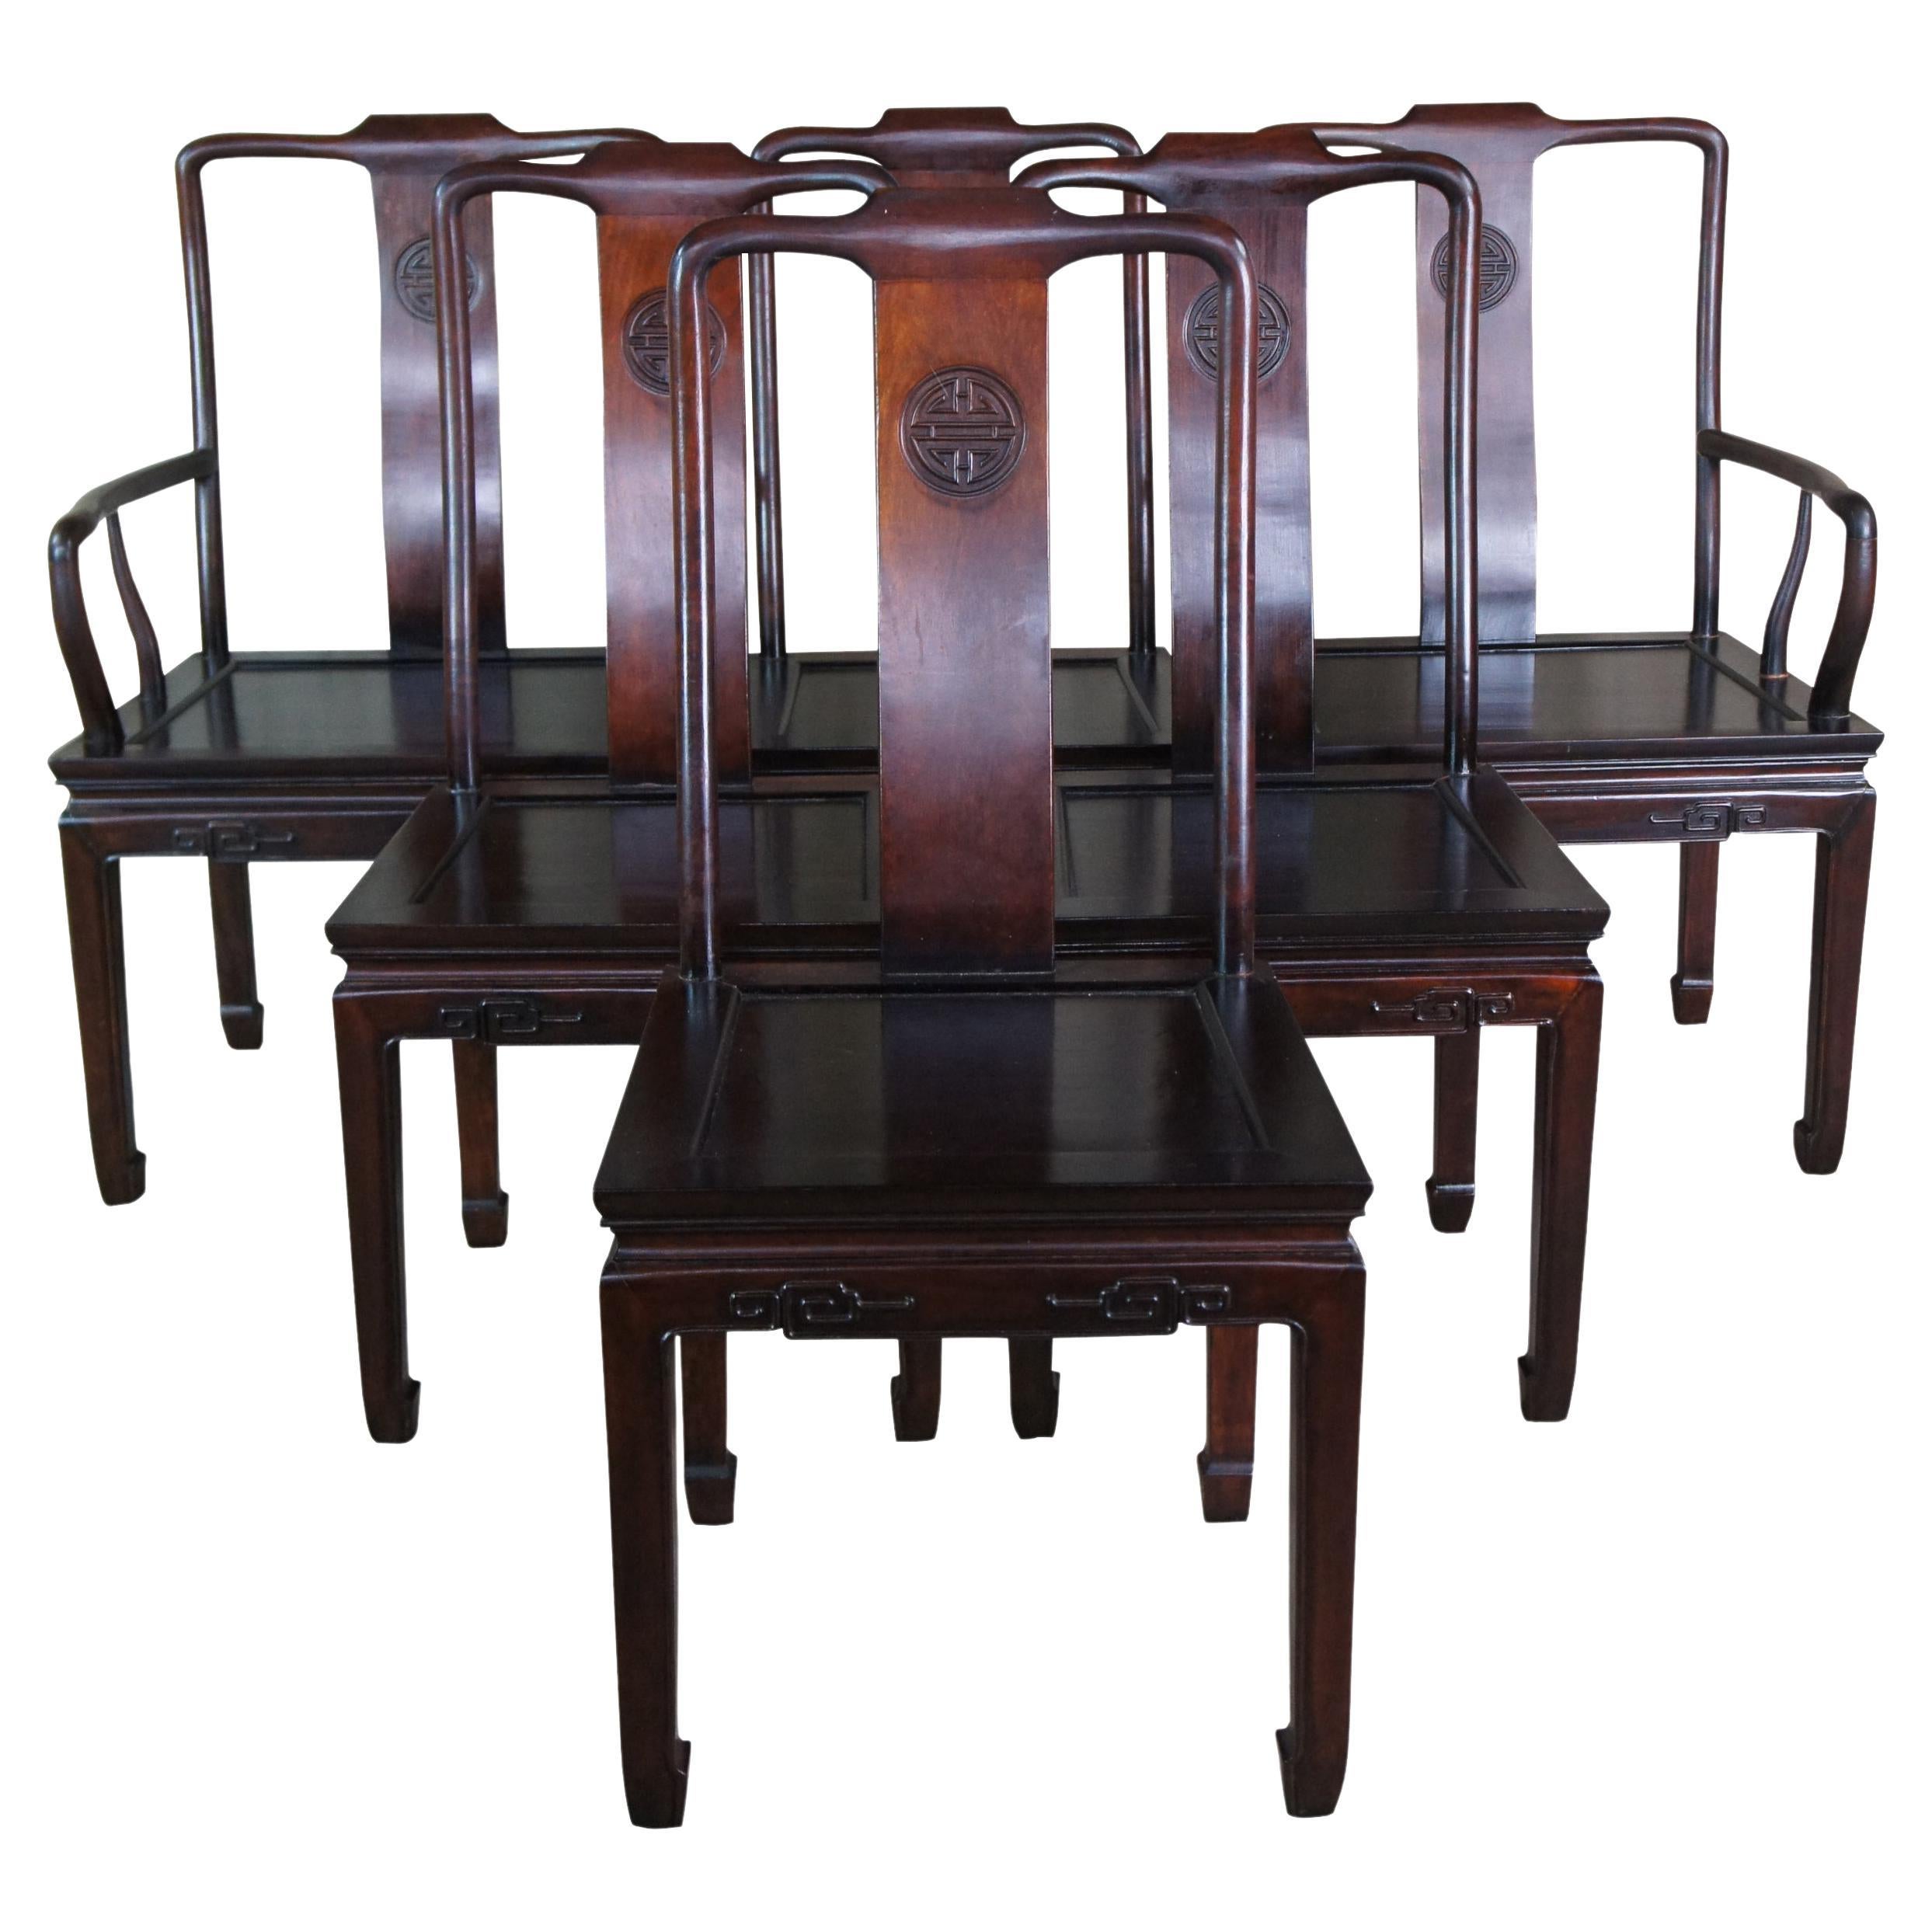 Six mid 20th century Chinese Ming style dining chairs. Made of rosewood featuring bentwood form with imperial crest and carved accents. Silk cushions included.

Measures: 22